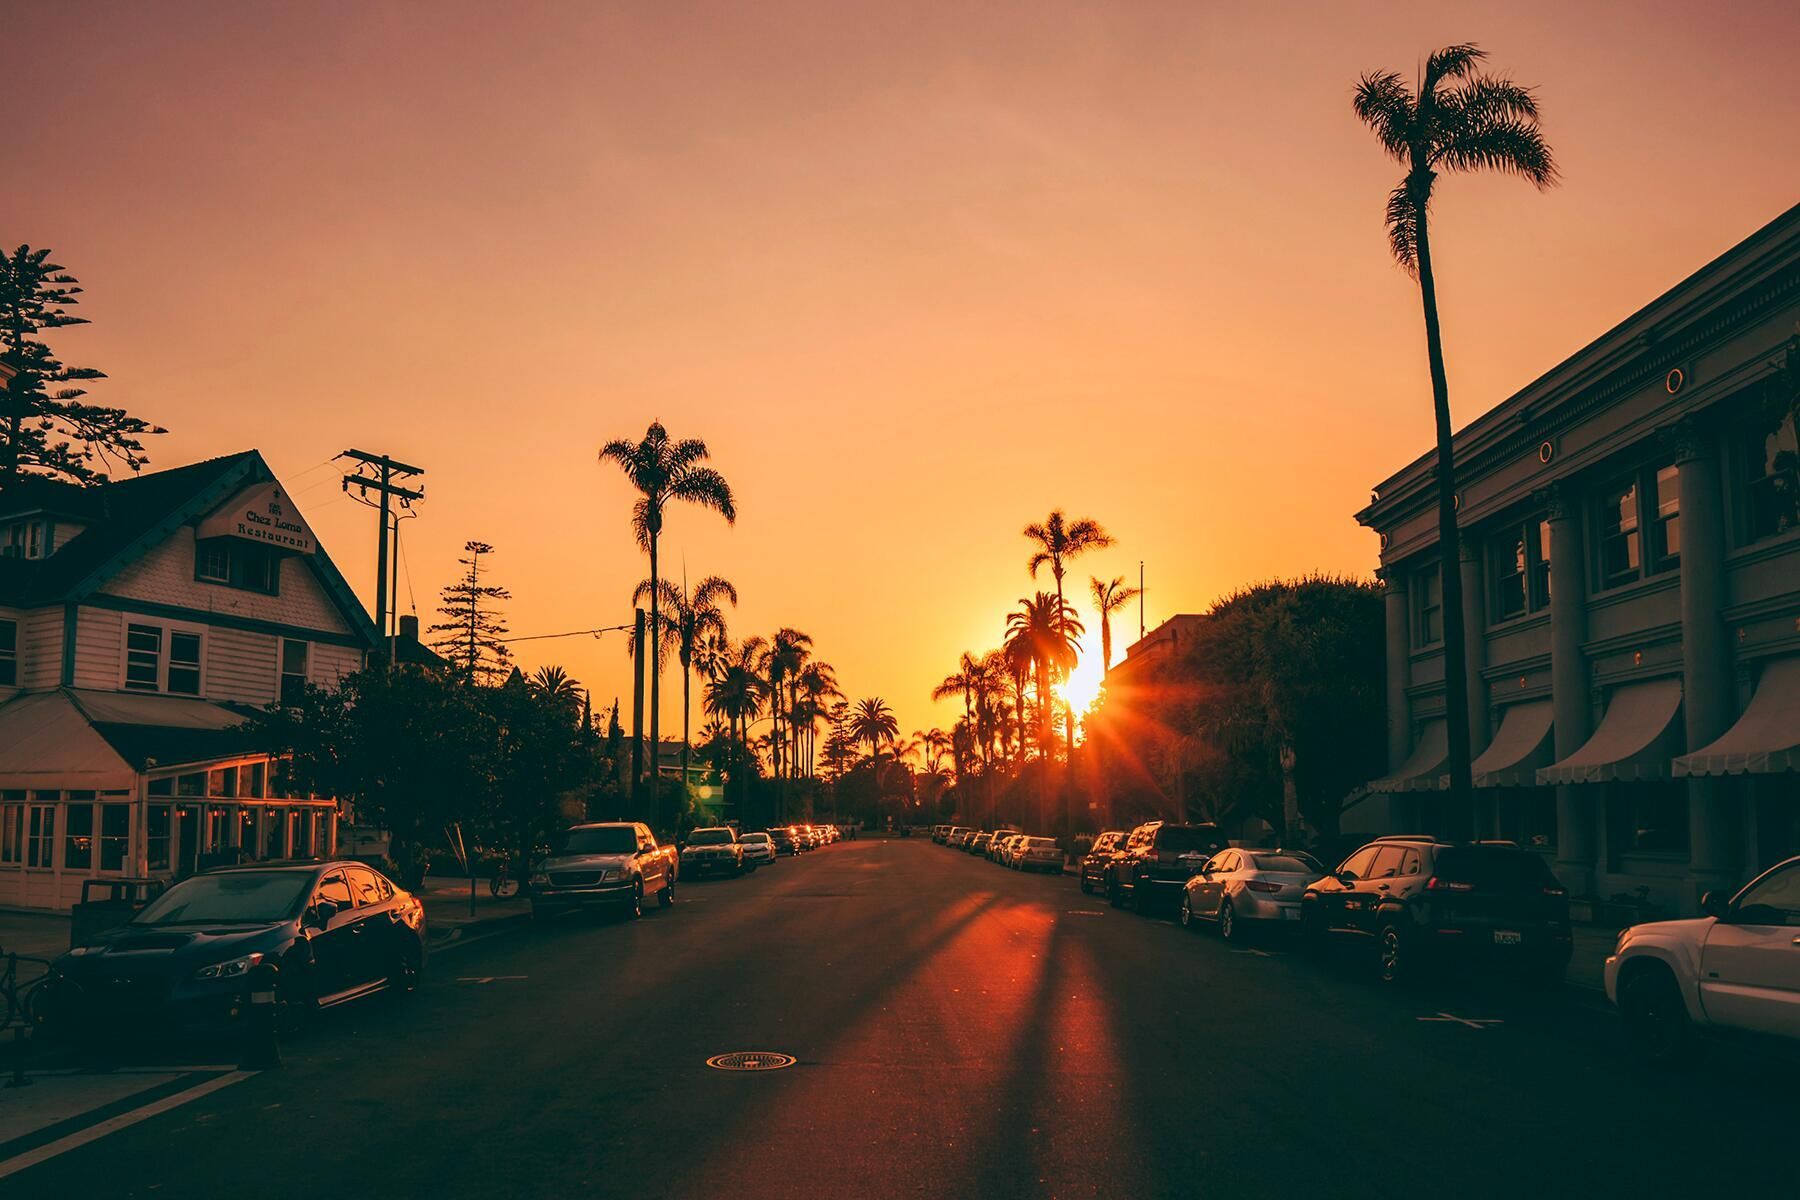 A street in California with palm trees and cars parked on the side of the road. - Sunset